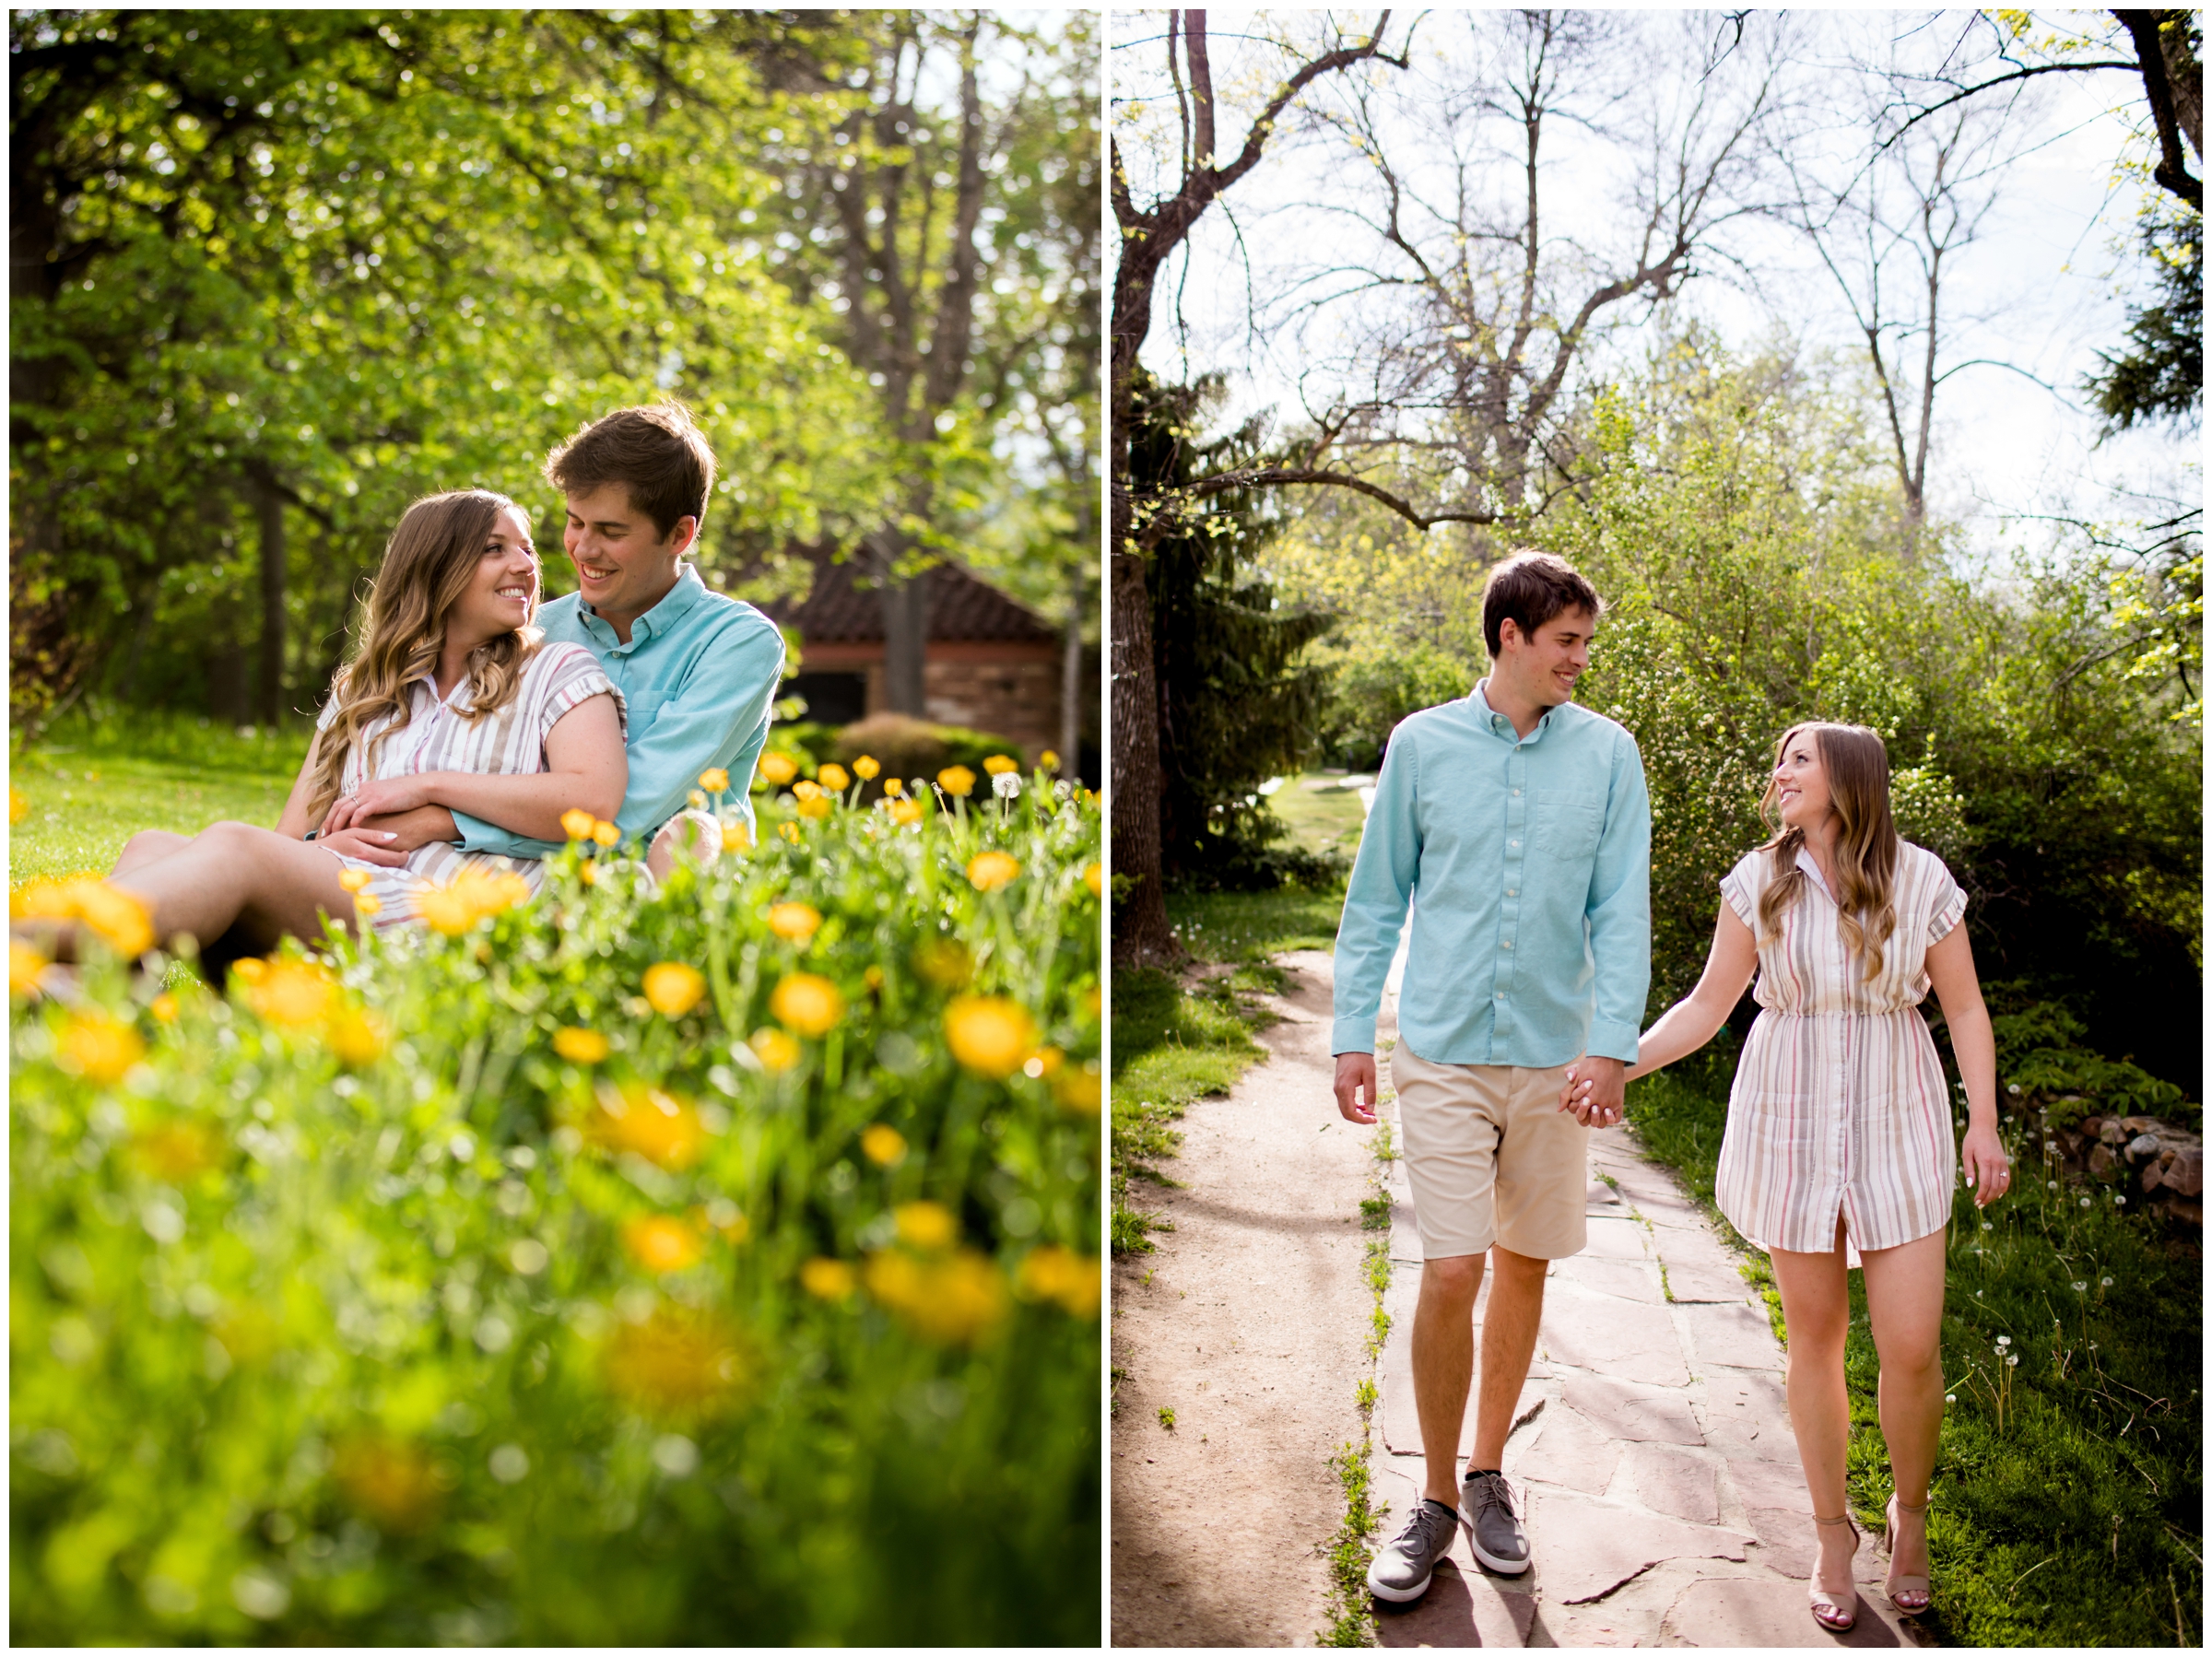 Couple sitting in flowers at CU Boulder campus during engagement photography session 